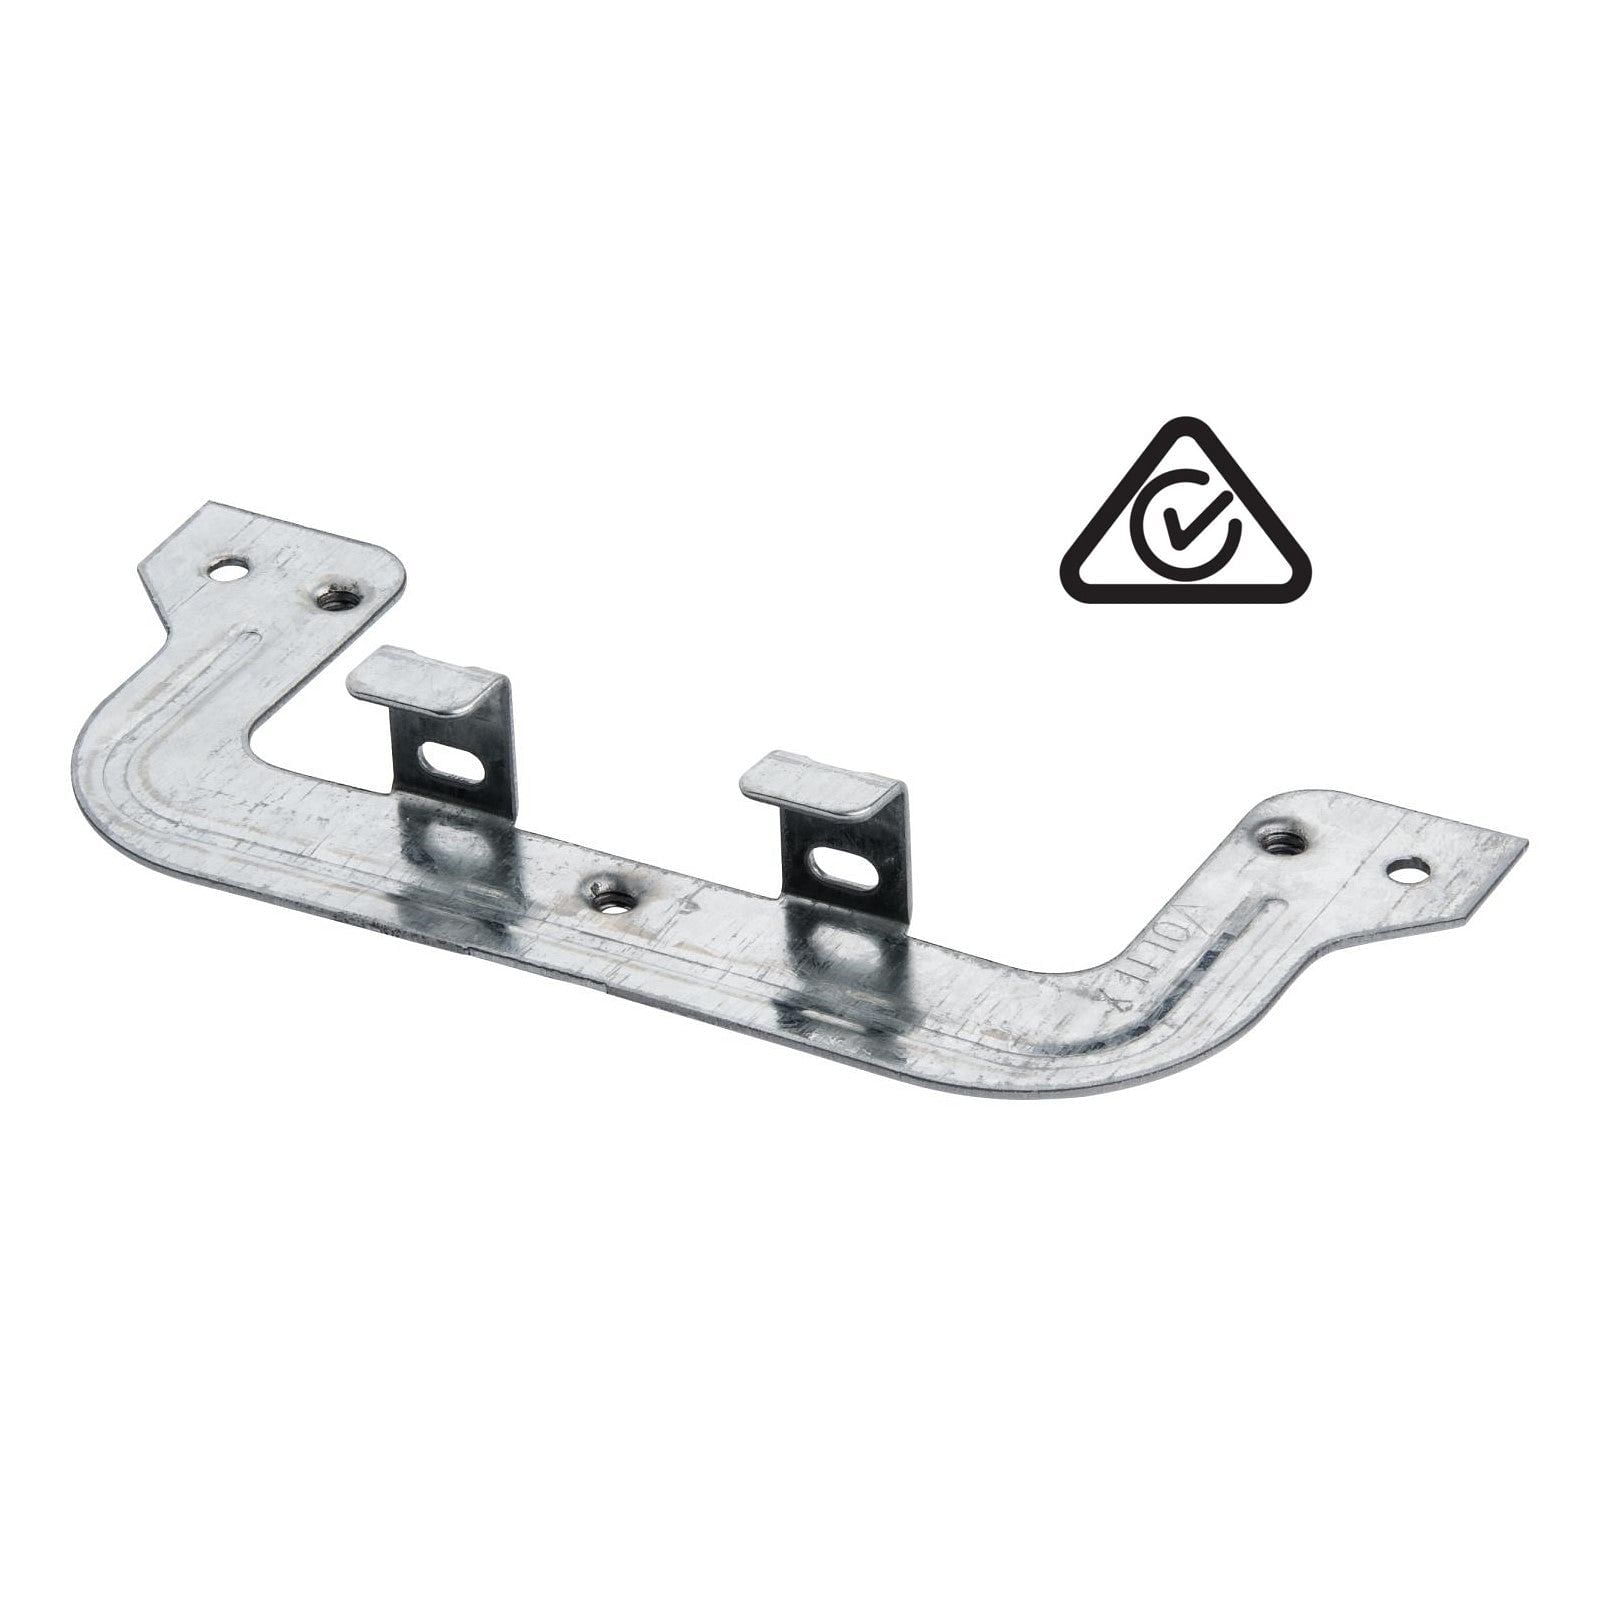 c clip plaster mounting bracket for light switches